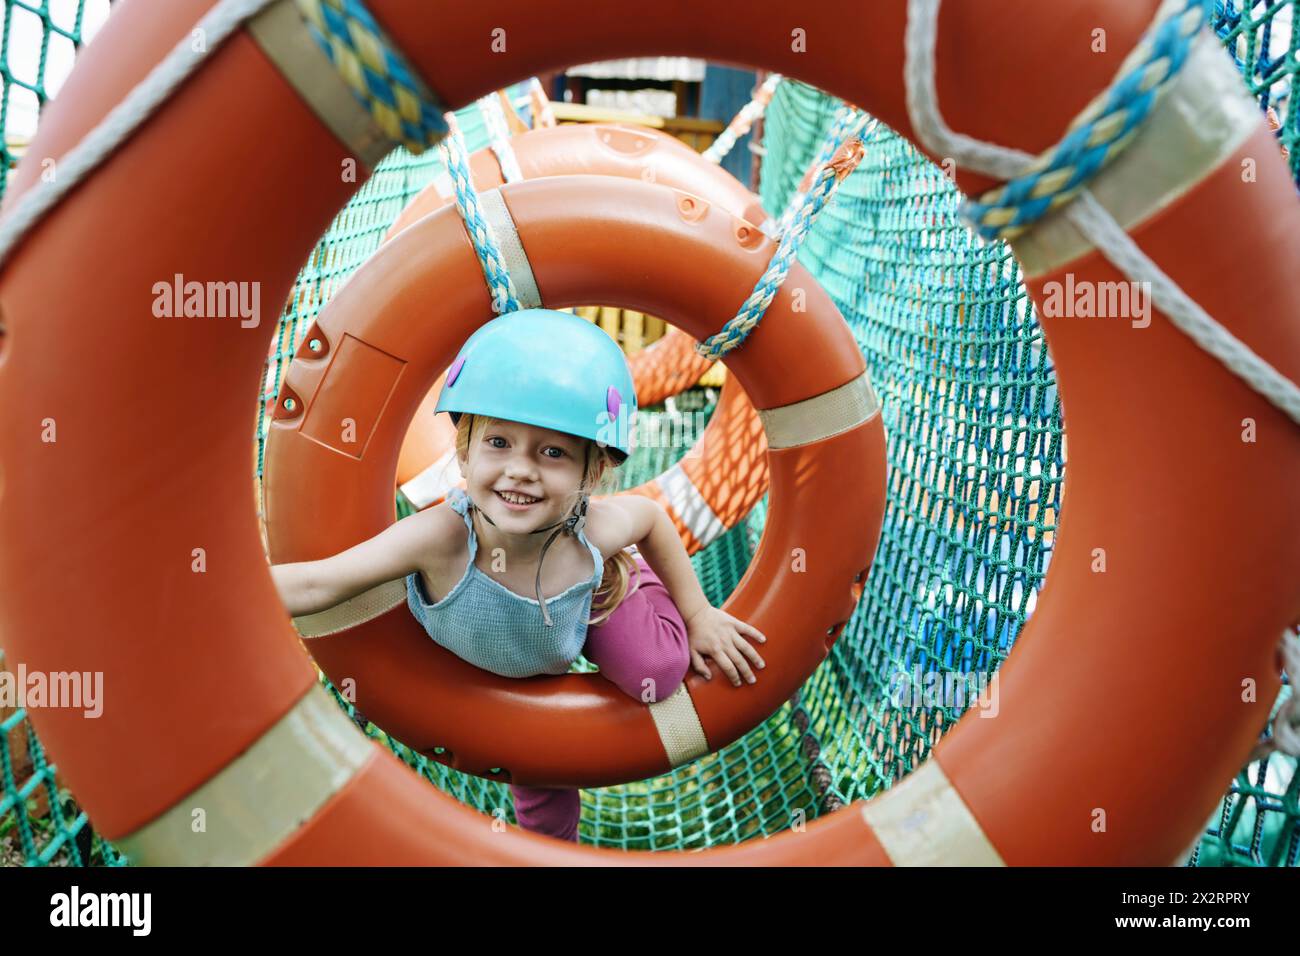 Smiling girl doing obstacle course at rope park Stock Photo